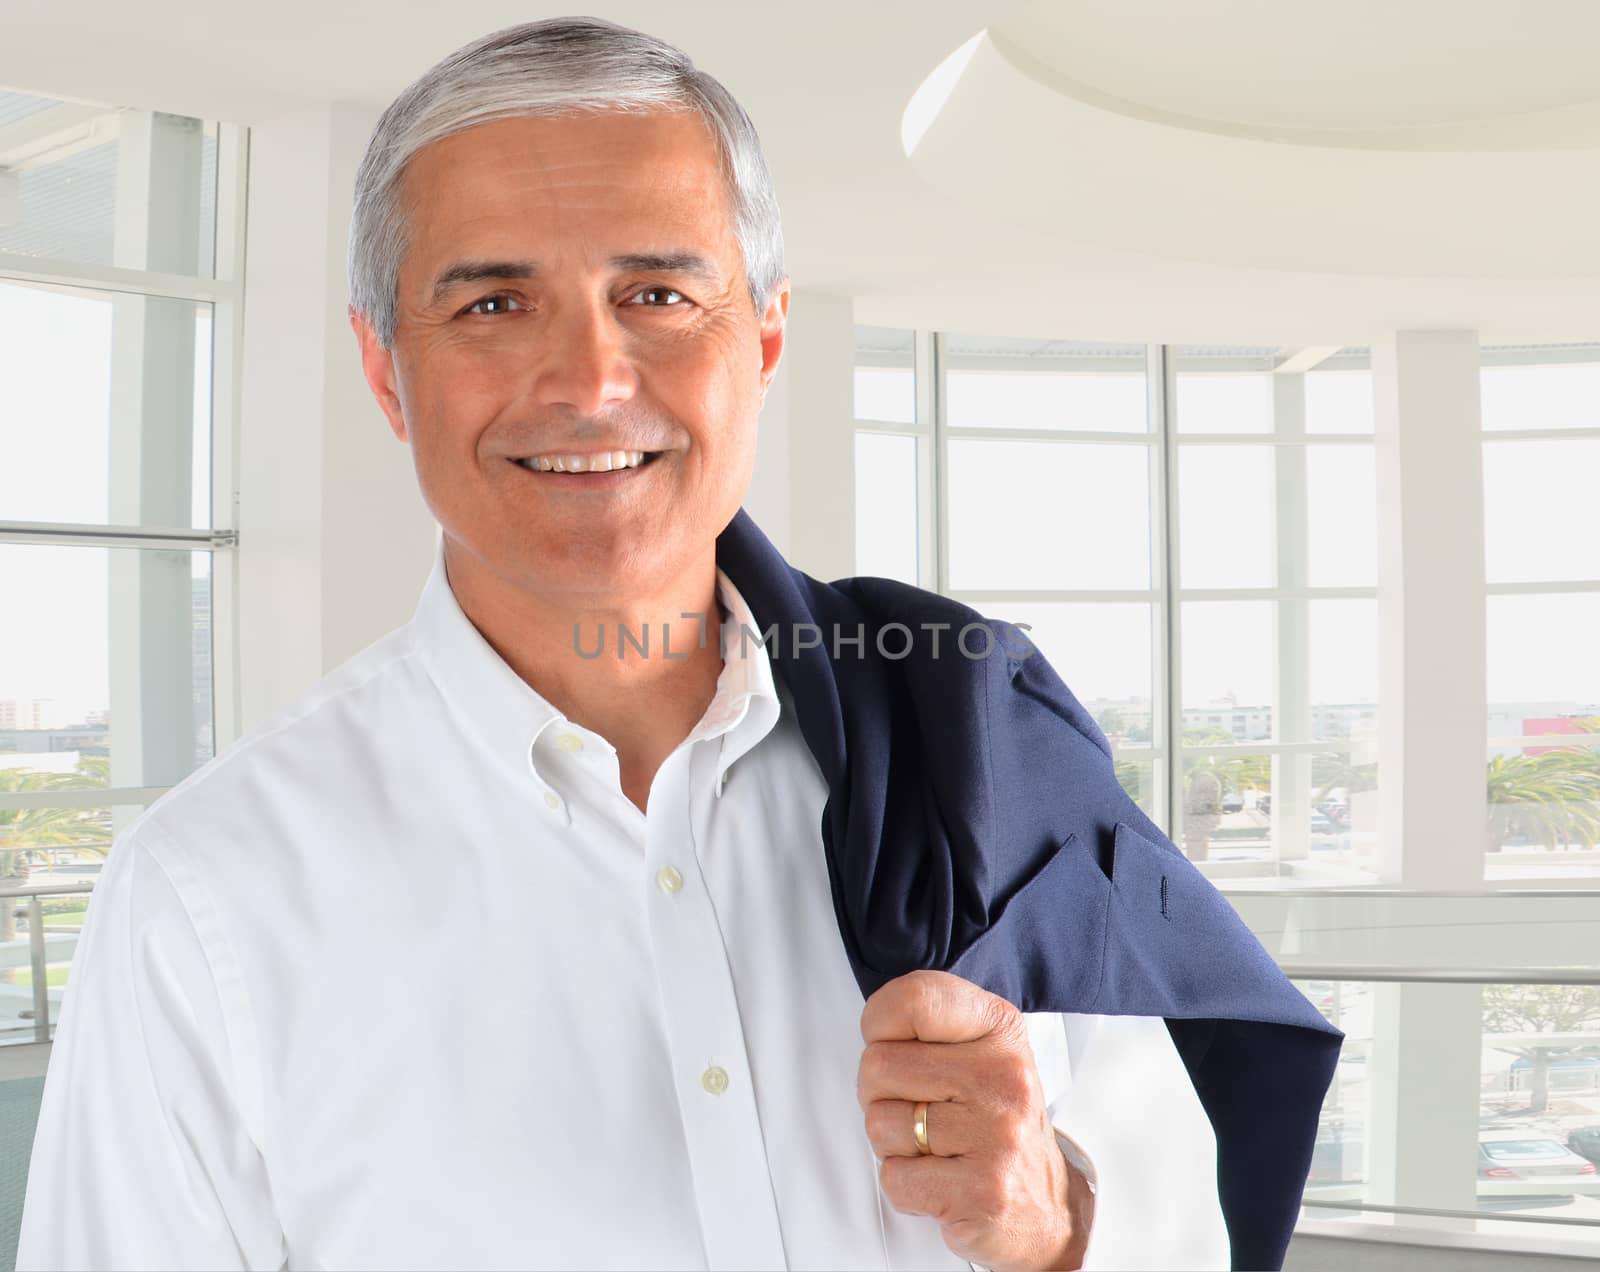 Portrait of a casually dressed businessman in a modern office building. Man is smiling holding his jacket over his shoulder.